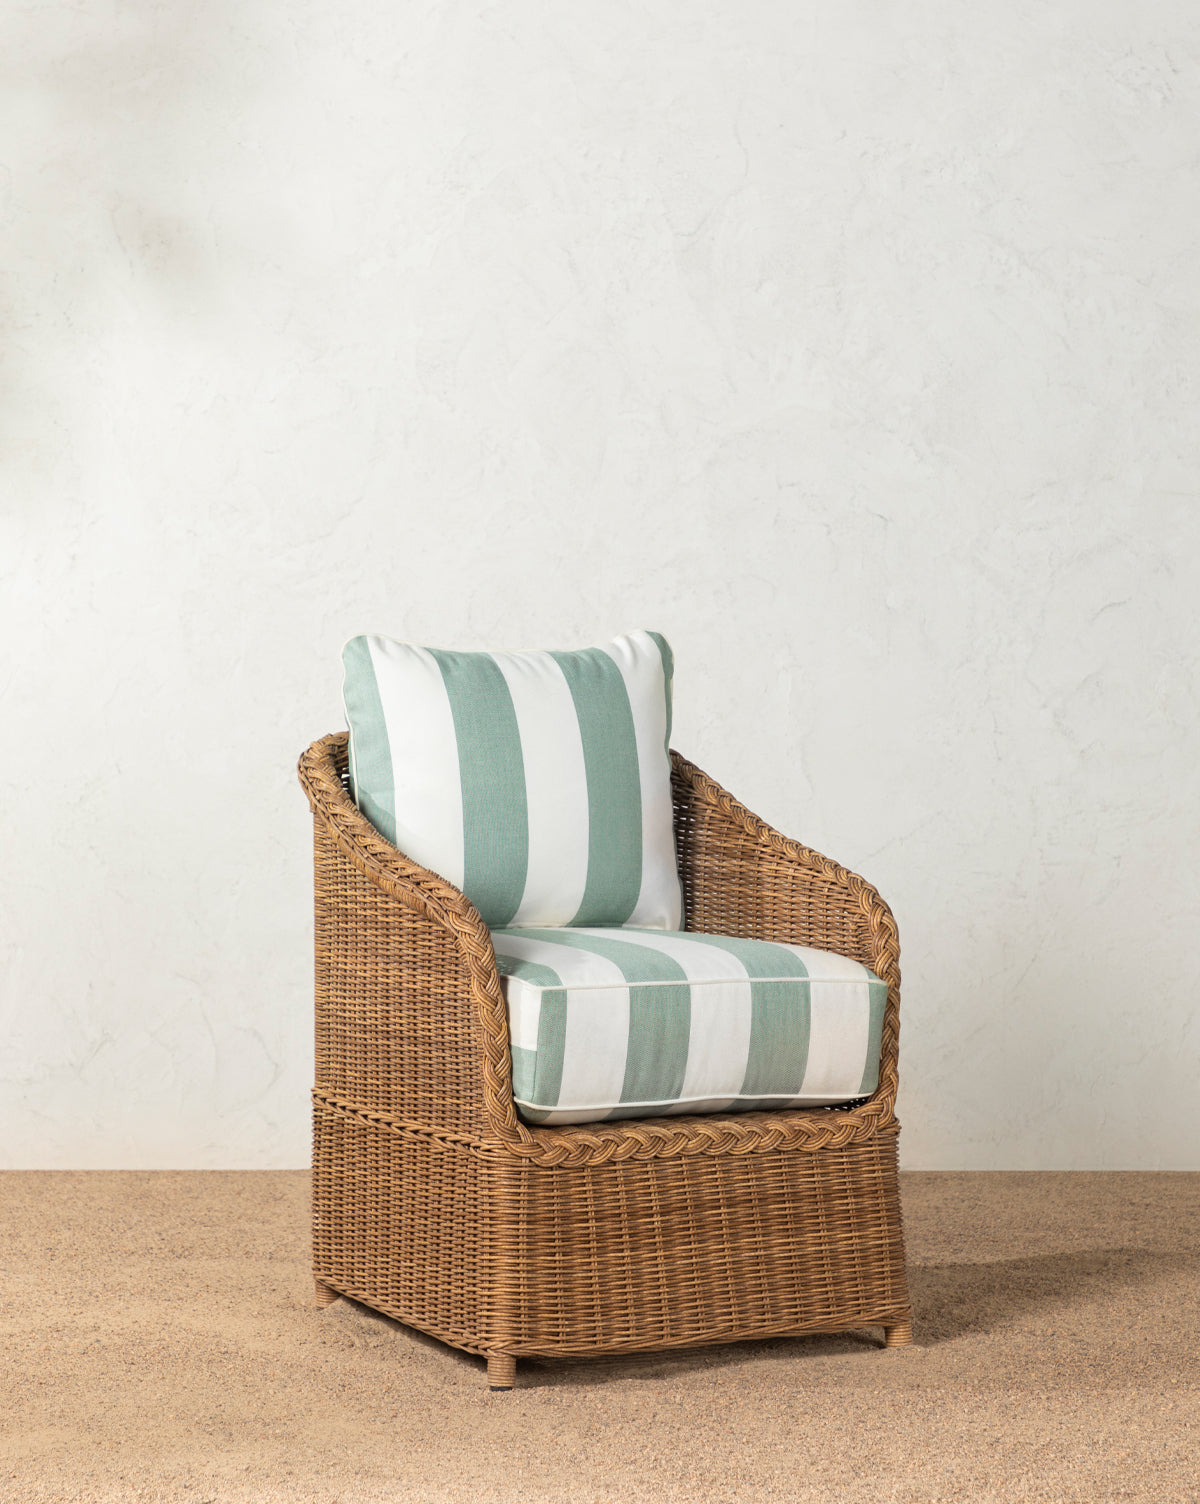 Makerspalm, Haviland Outdoor Dining Chair with Striped Cushions